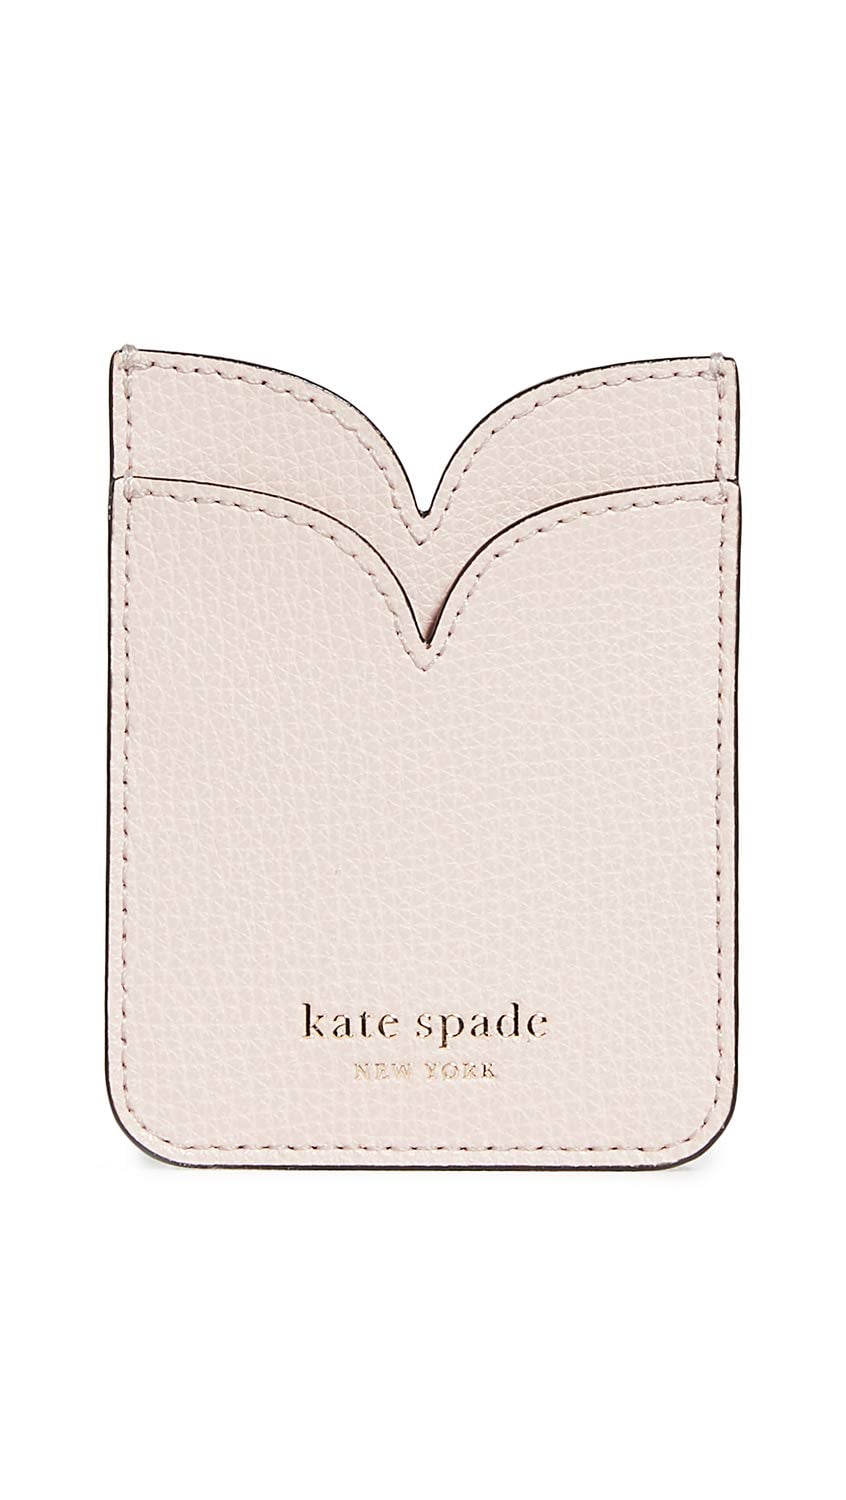 Kate Spade New York Sylvia Double Sticker Pocket | The 50 Most Stylish  Fashion Accessories You Can Get on Amazon For Under $50 | POPSUGAR Fashion  Photo 45